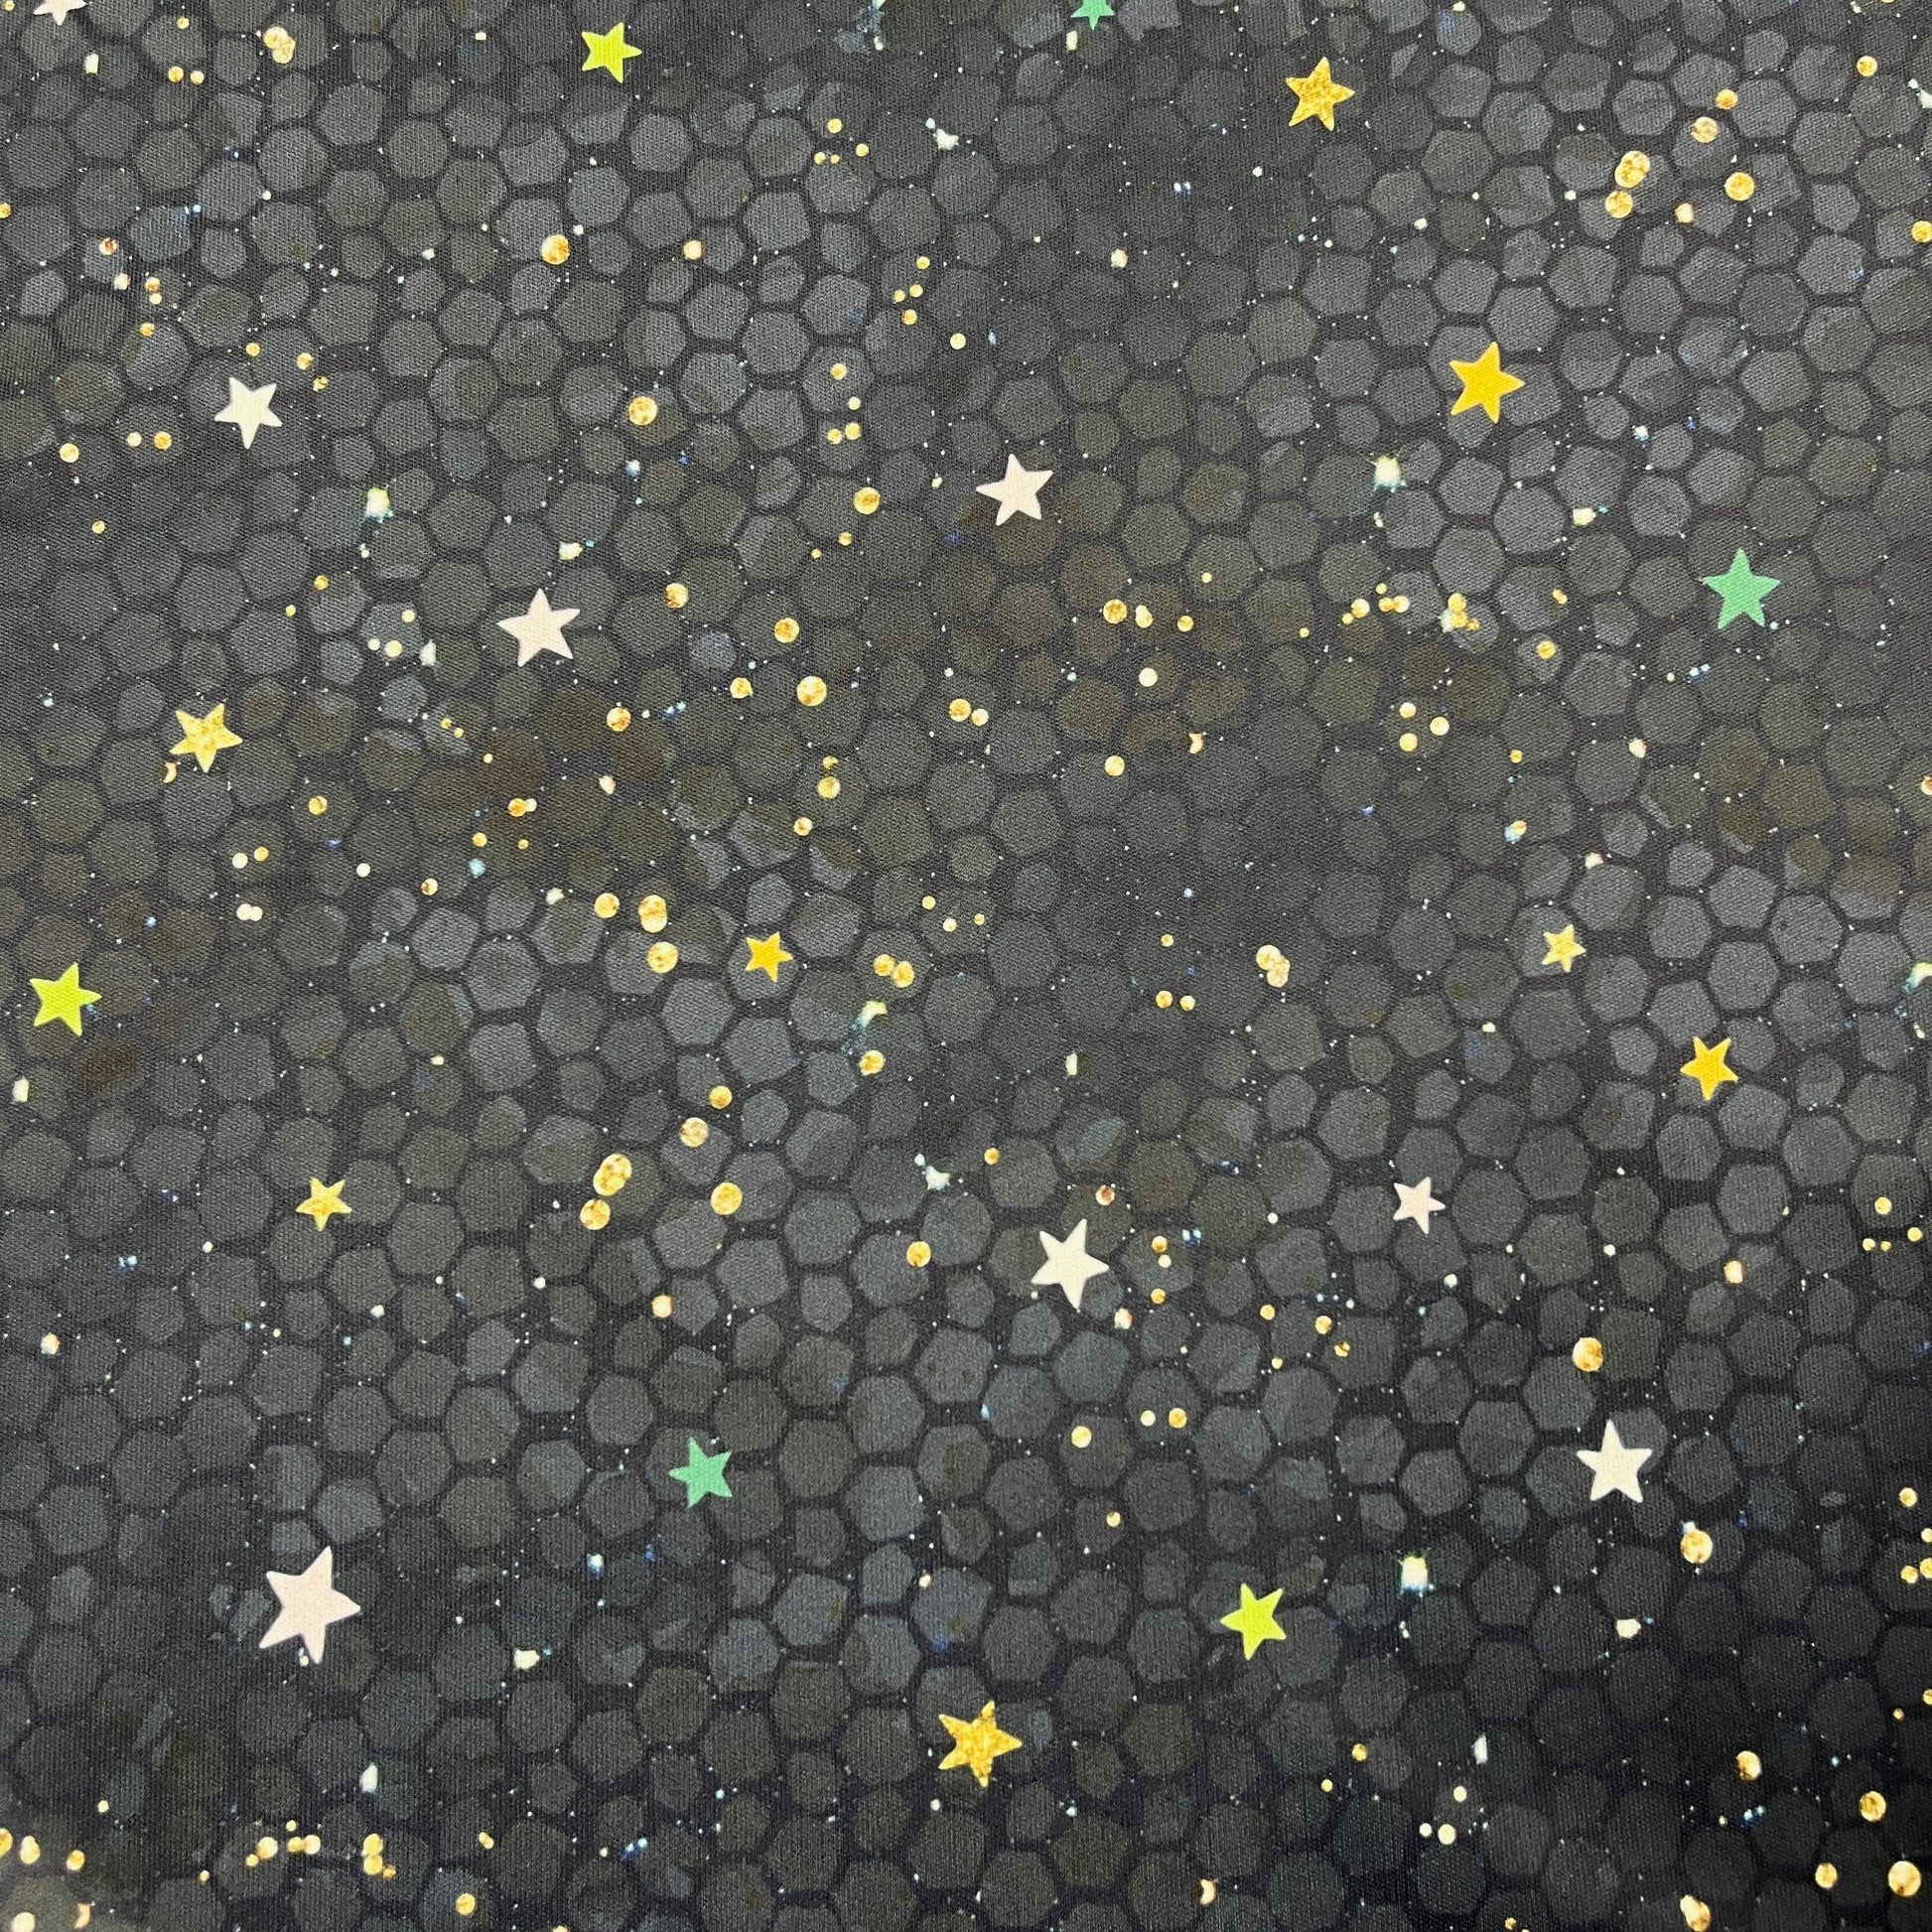 Evening Stars 1 mil PUL Fabric - Made in the USA - Nature's Fabrics